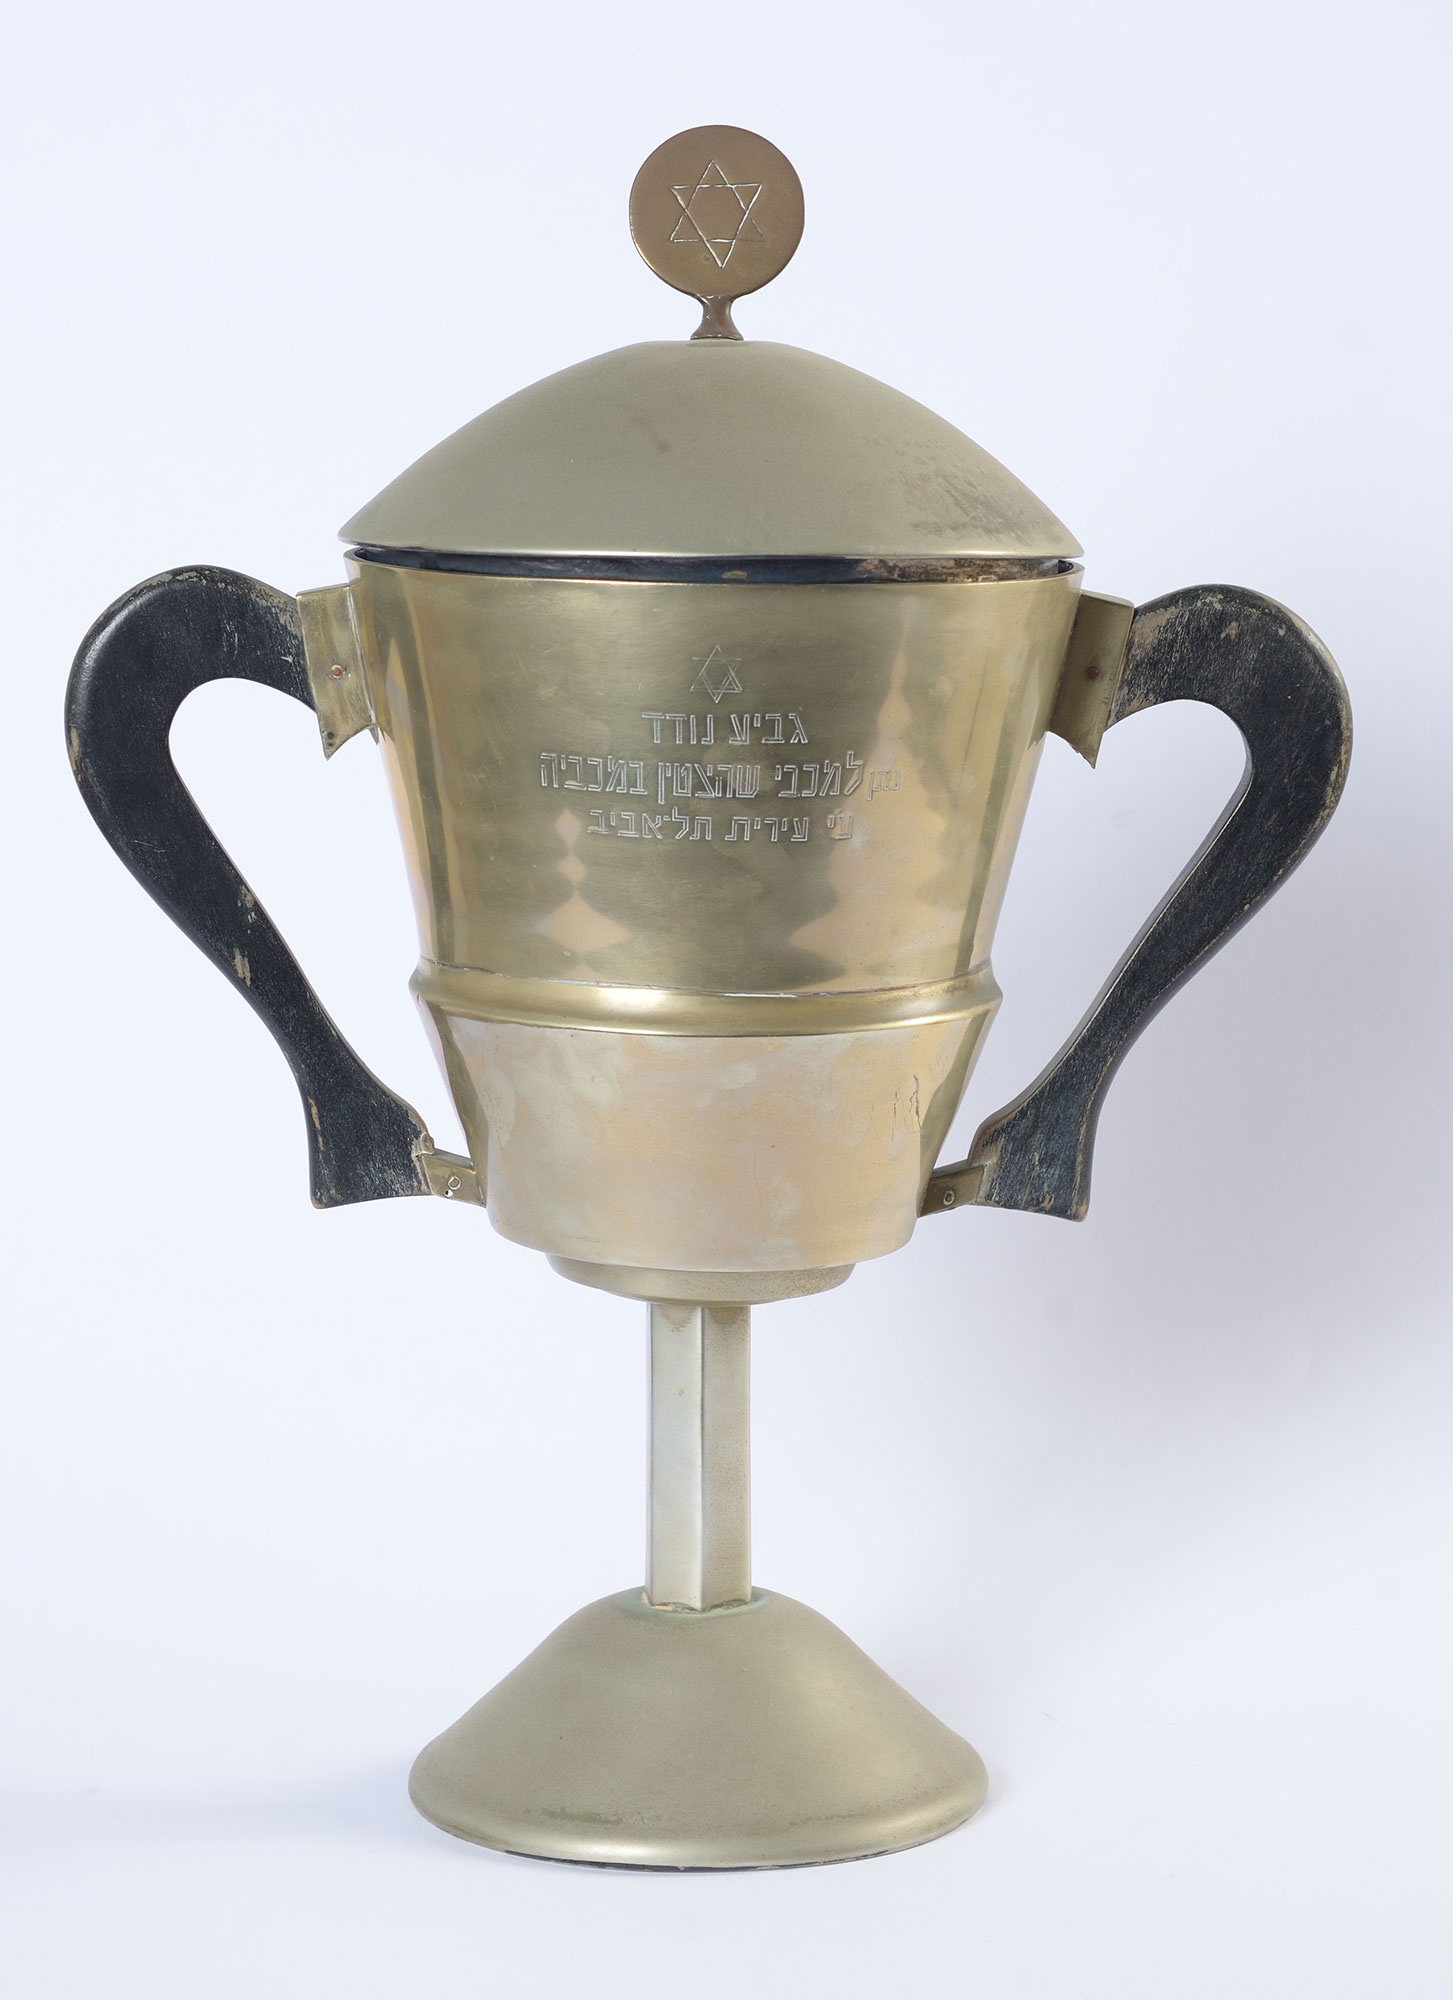 Outstanding Maccabiah Athlete trophy, a gift of the Tel Aviv Municipality, awarded to athlete Maryla Freiwald at the 1935 Maccabiah games